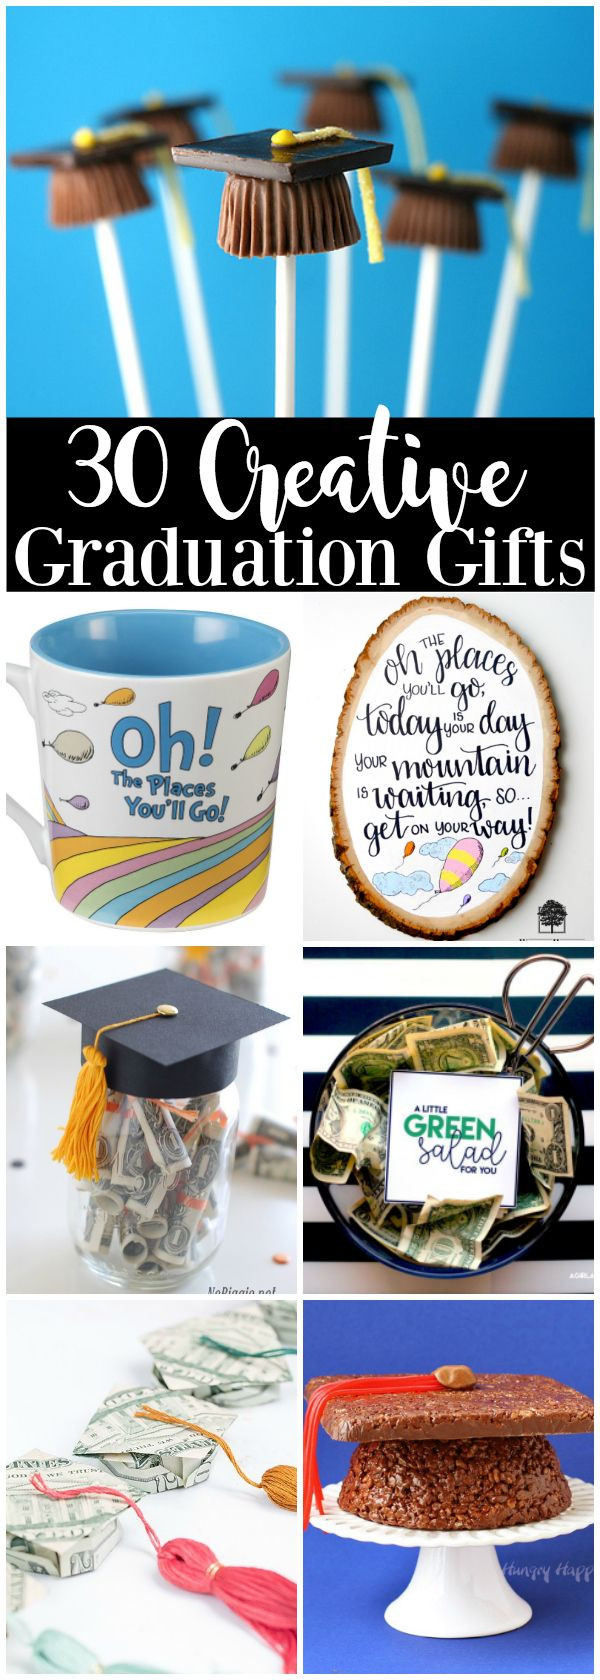 College Graduation Gift Ideas For Sister
 30 Creative Graduation Gift Ideas